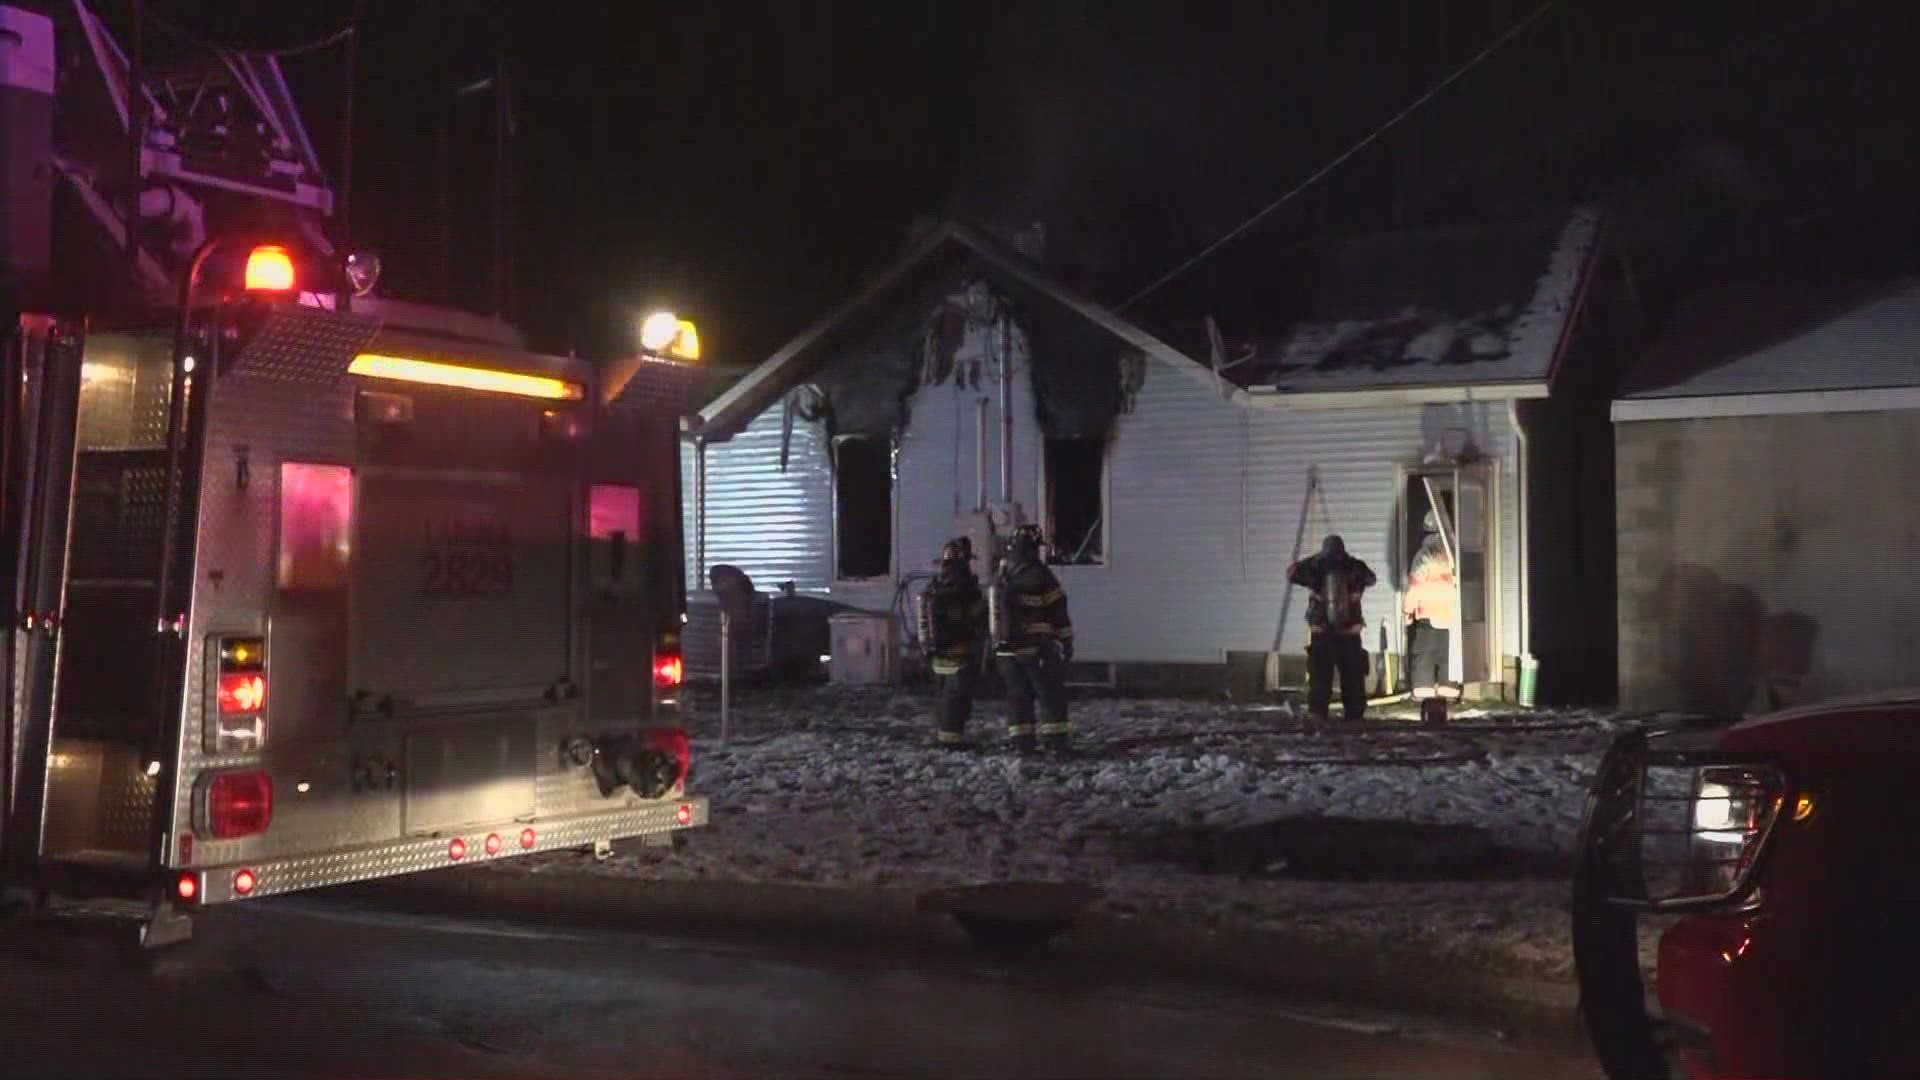 The fire began at about 5:30 a.m. on 1st Avenue in Fairview Heights. One person was killed.